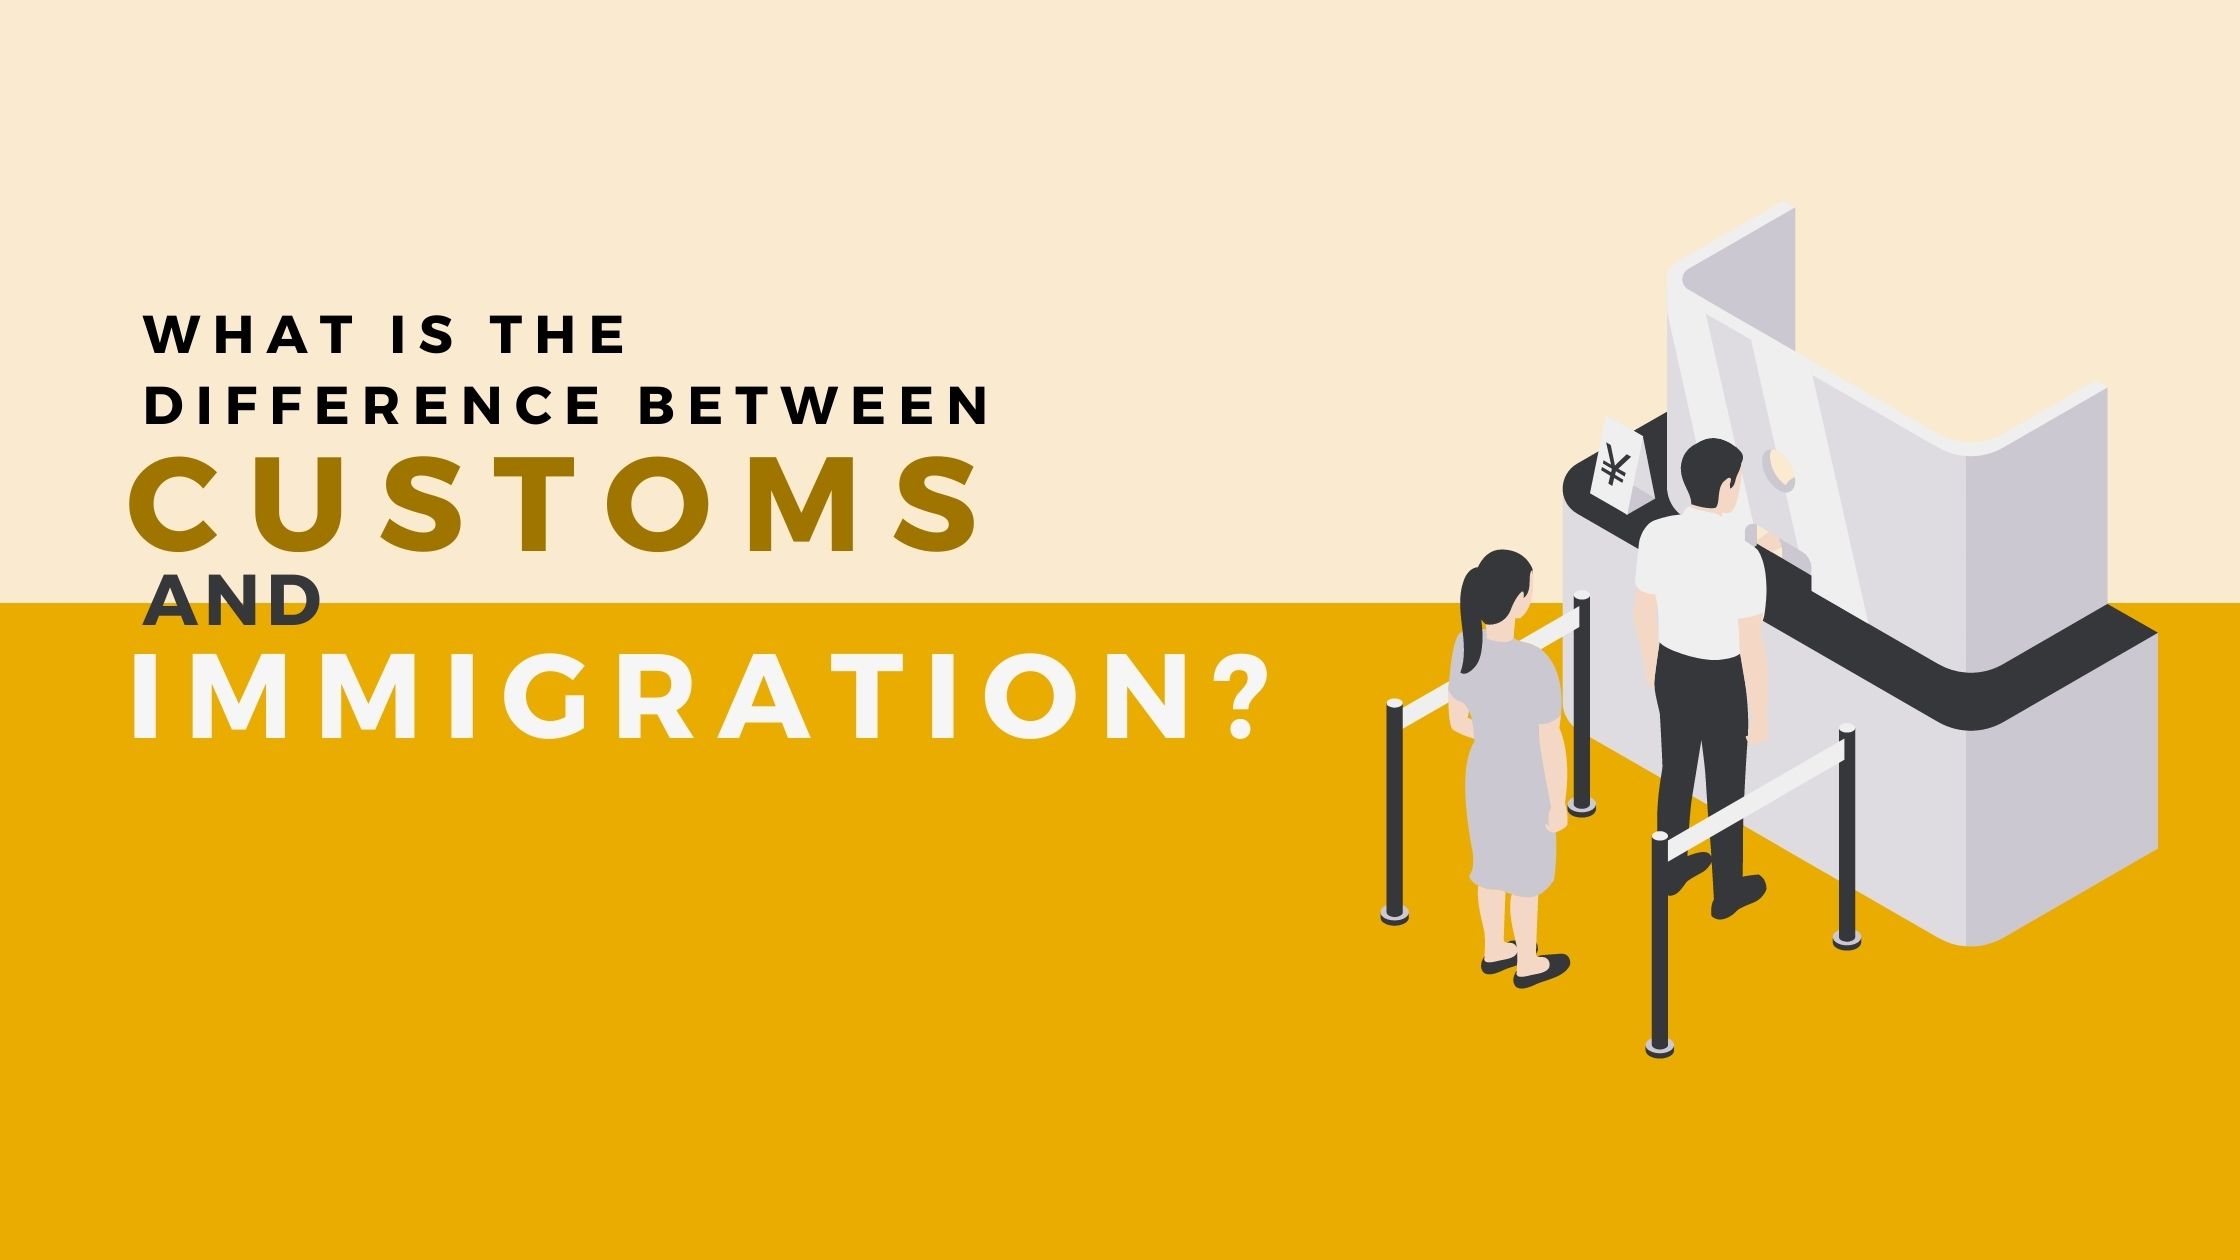 What Is The Difference Between Customs And Immigration?